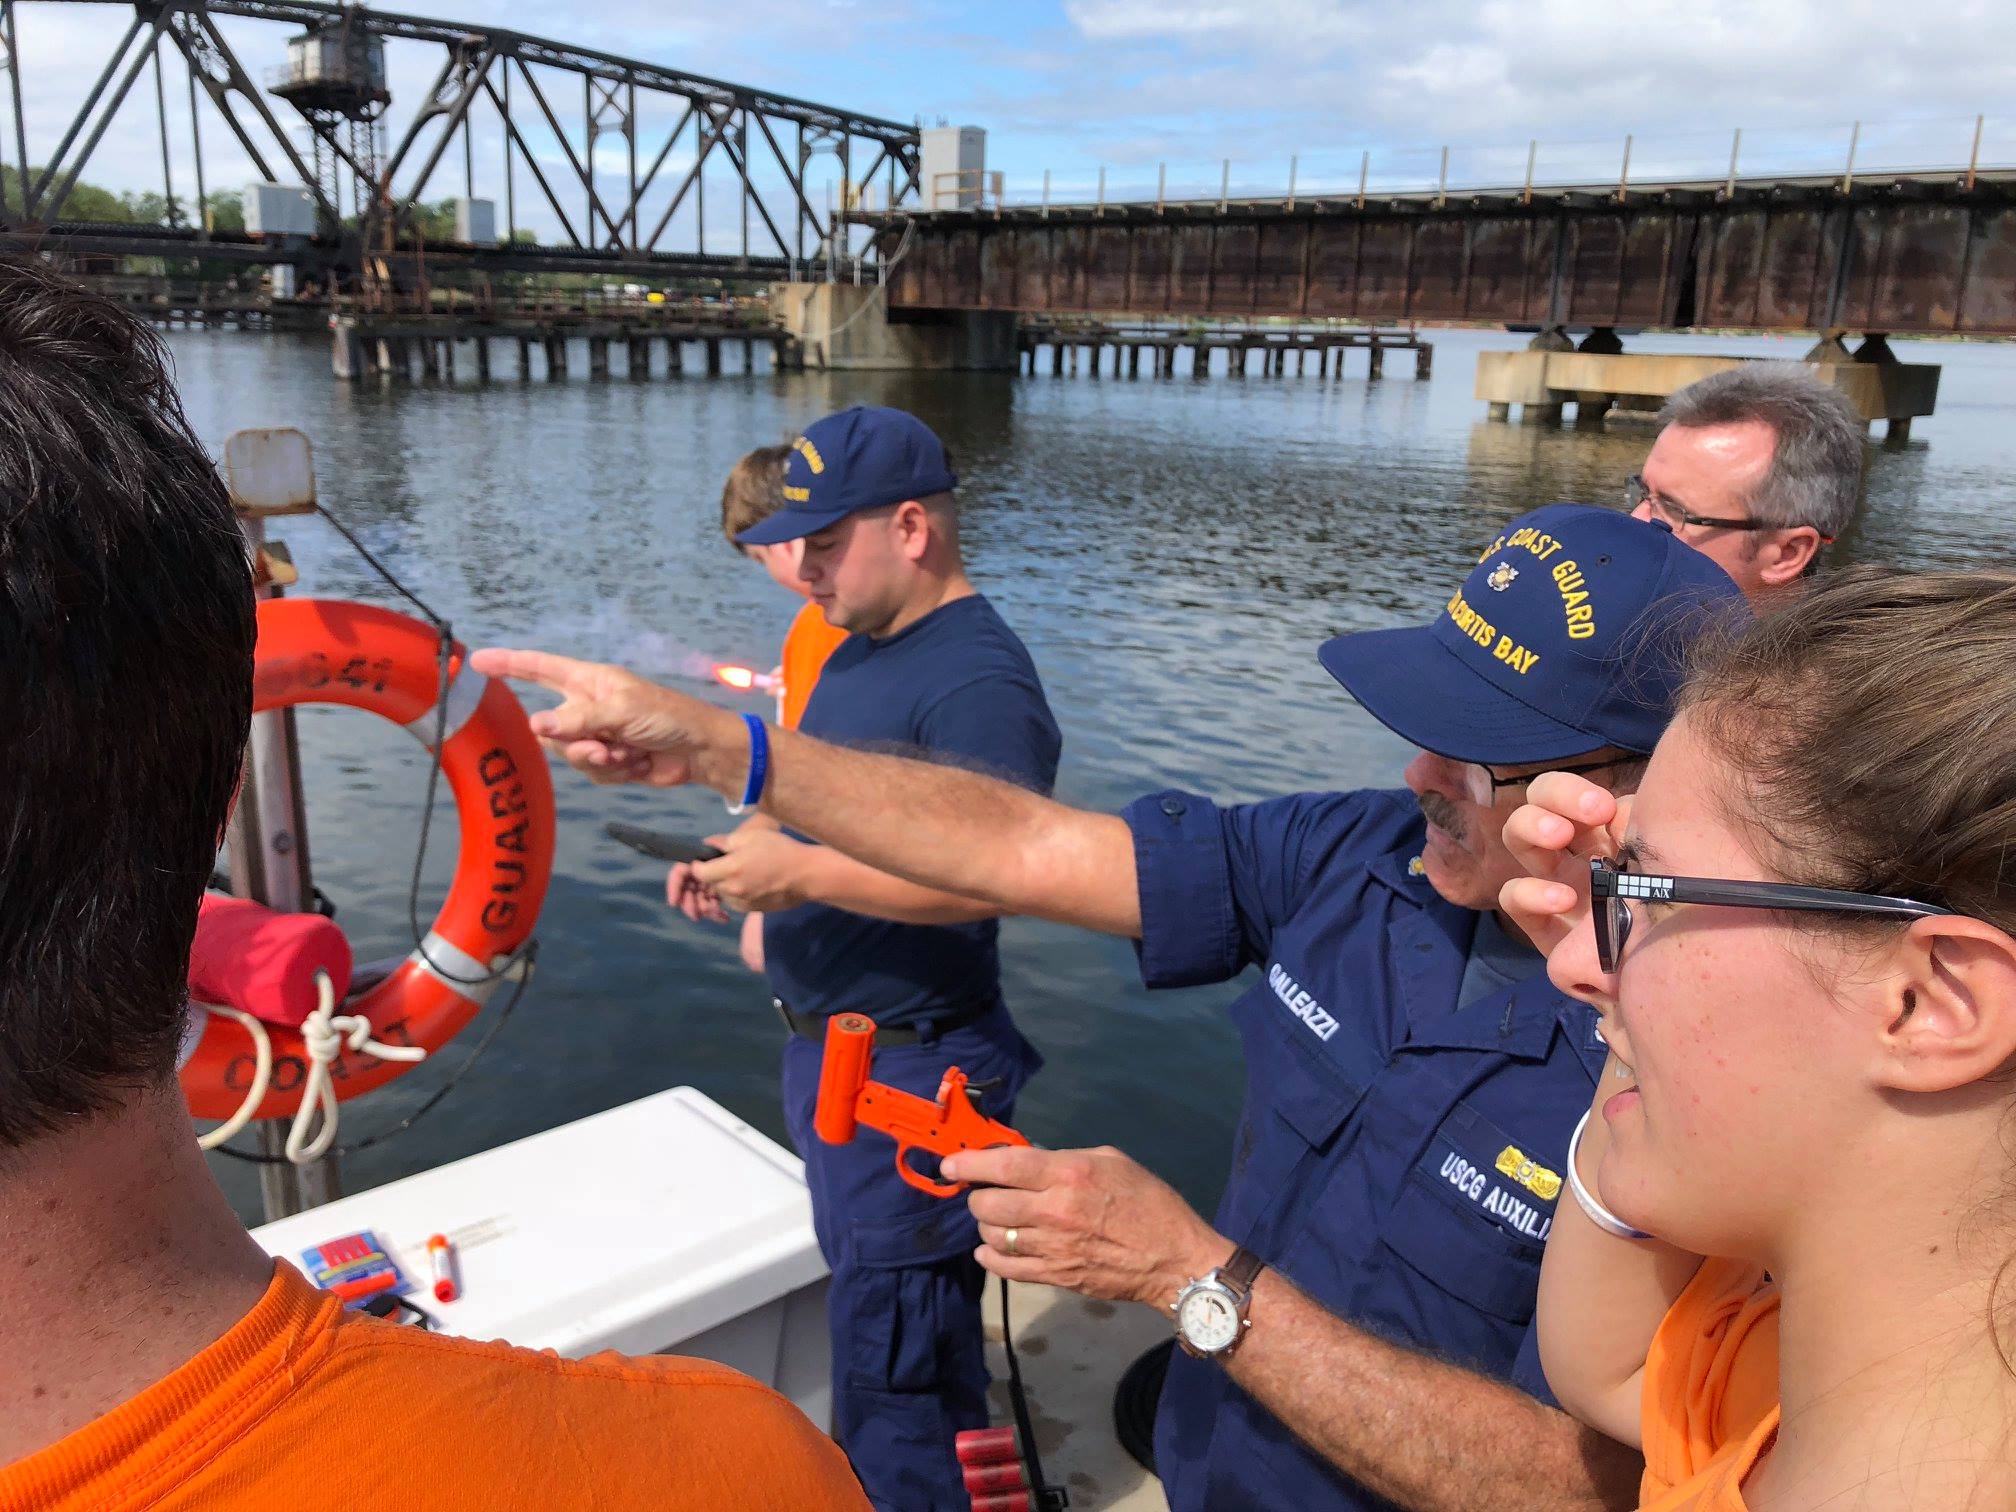 Sea Scouts participating in Safety at Sea